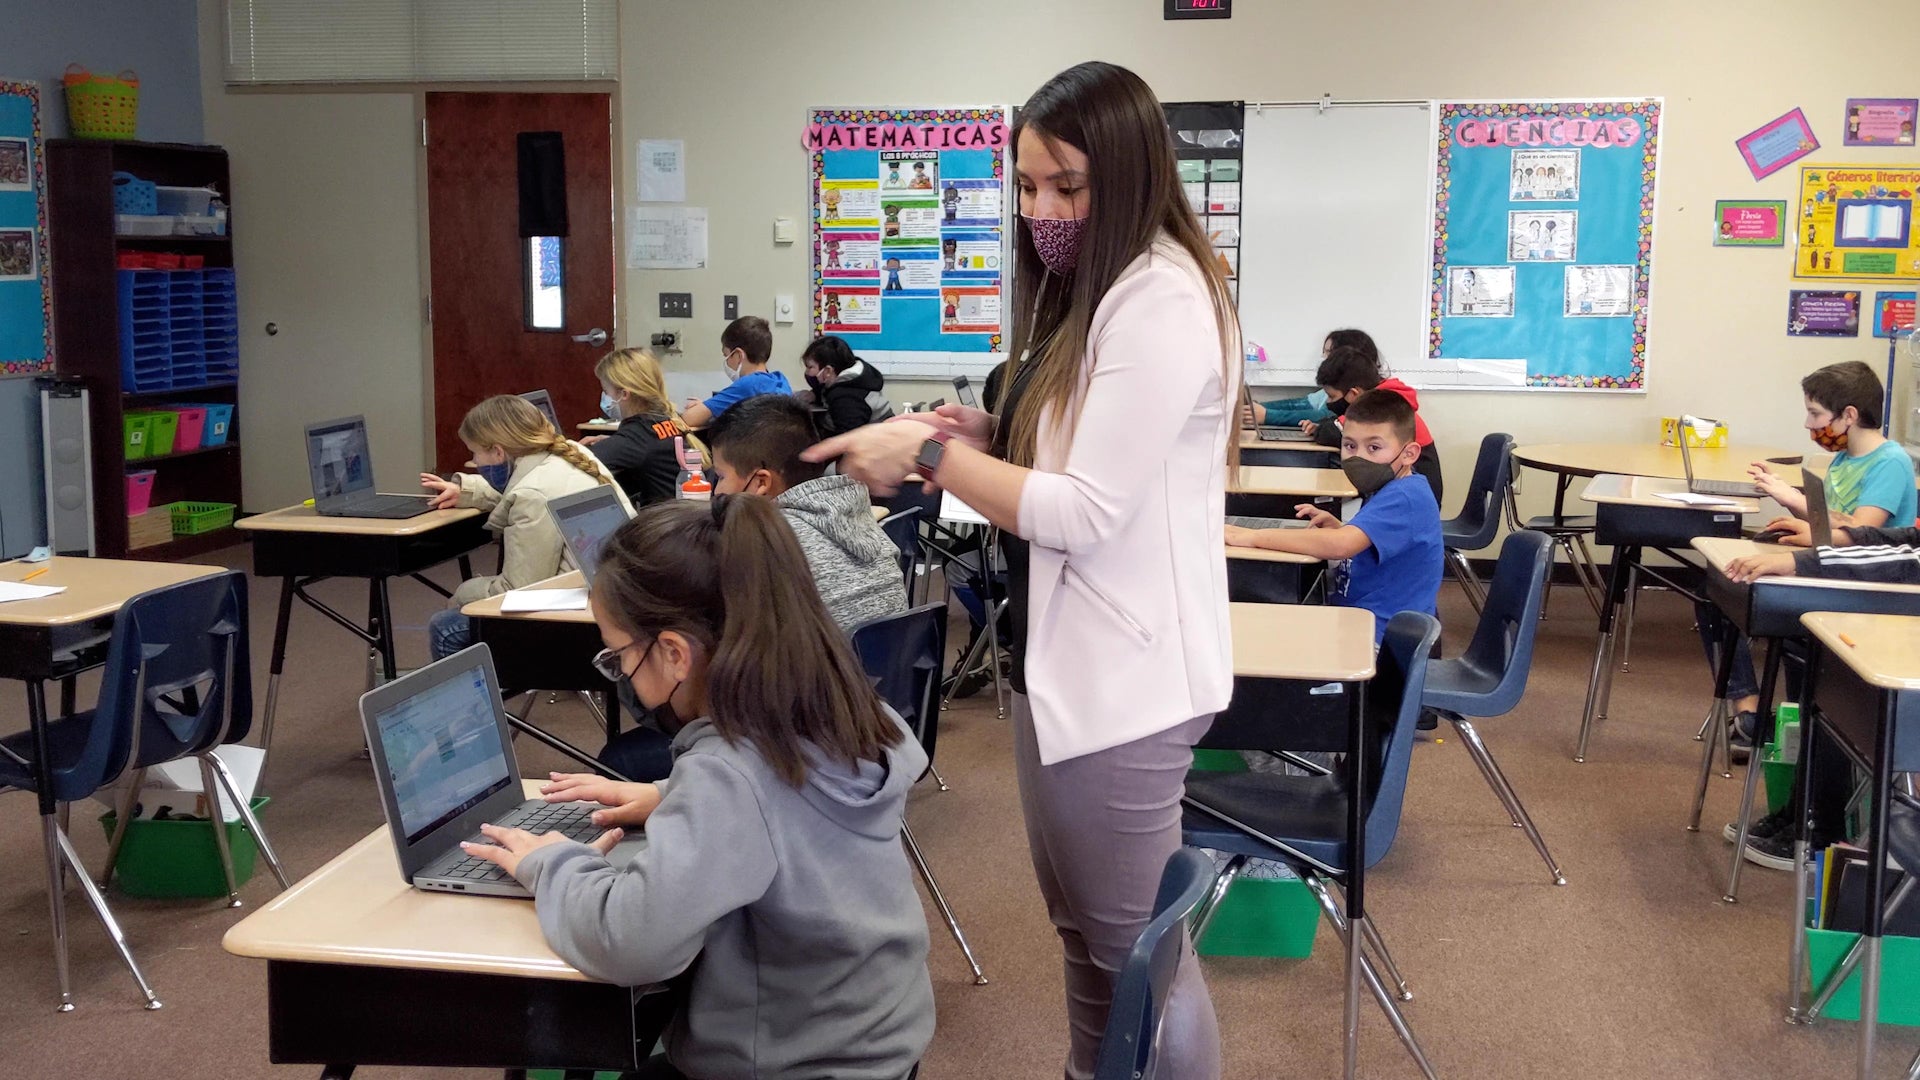 Students work on laptops in a classroom